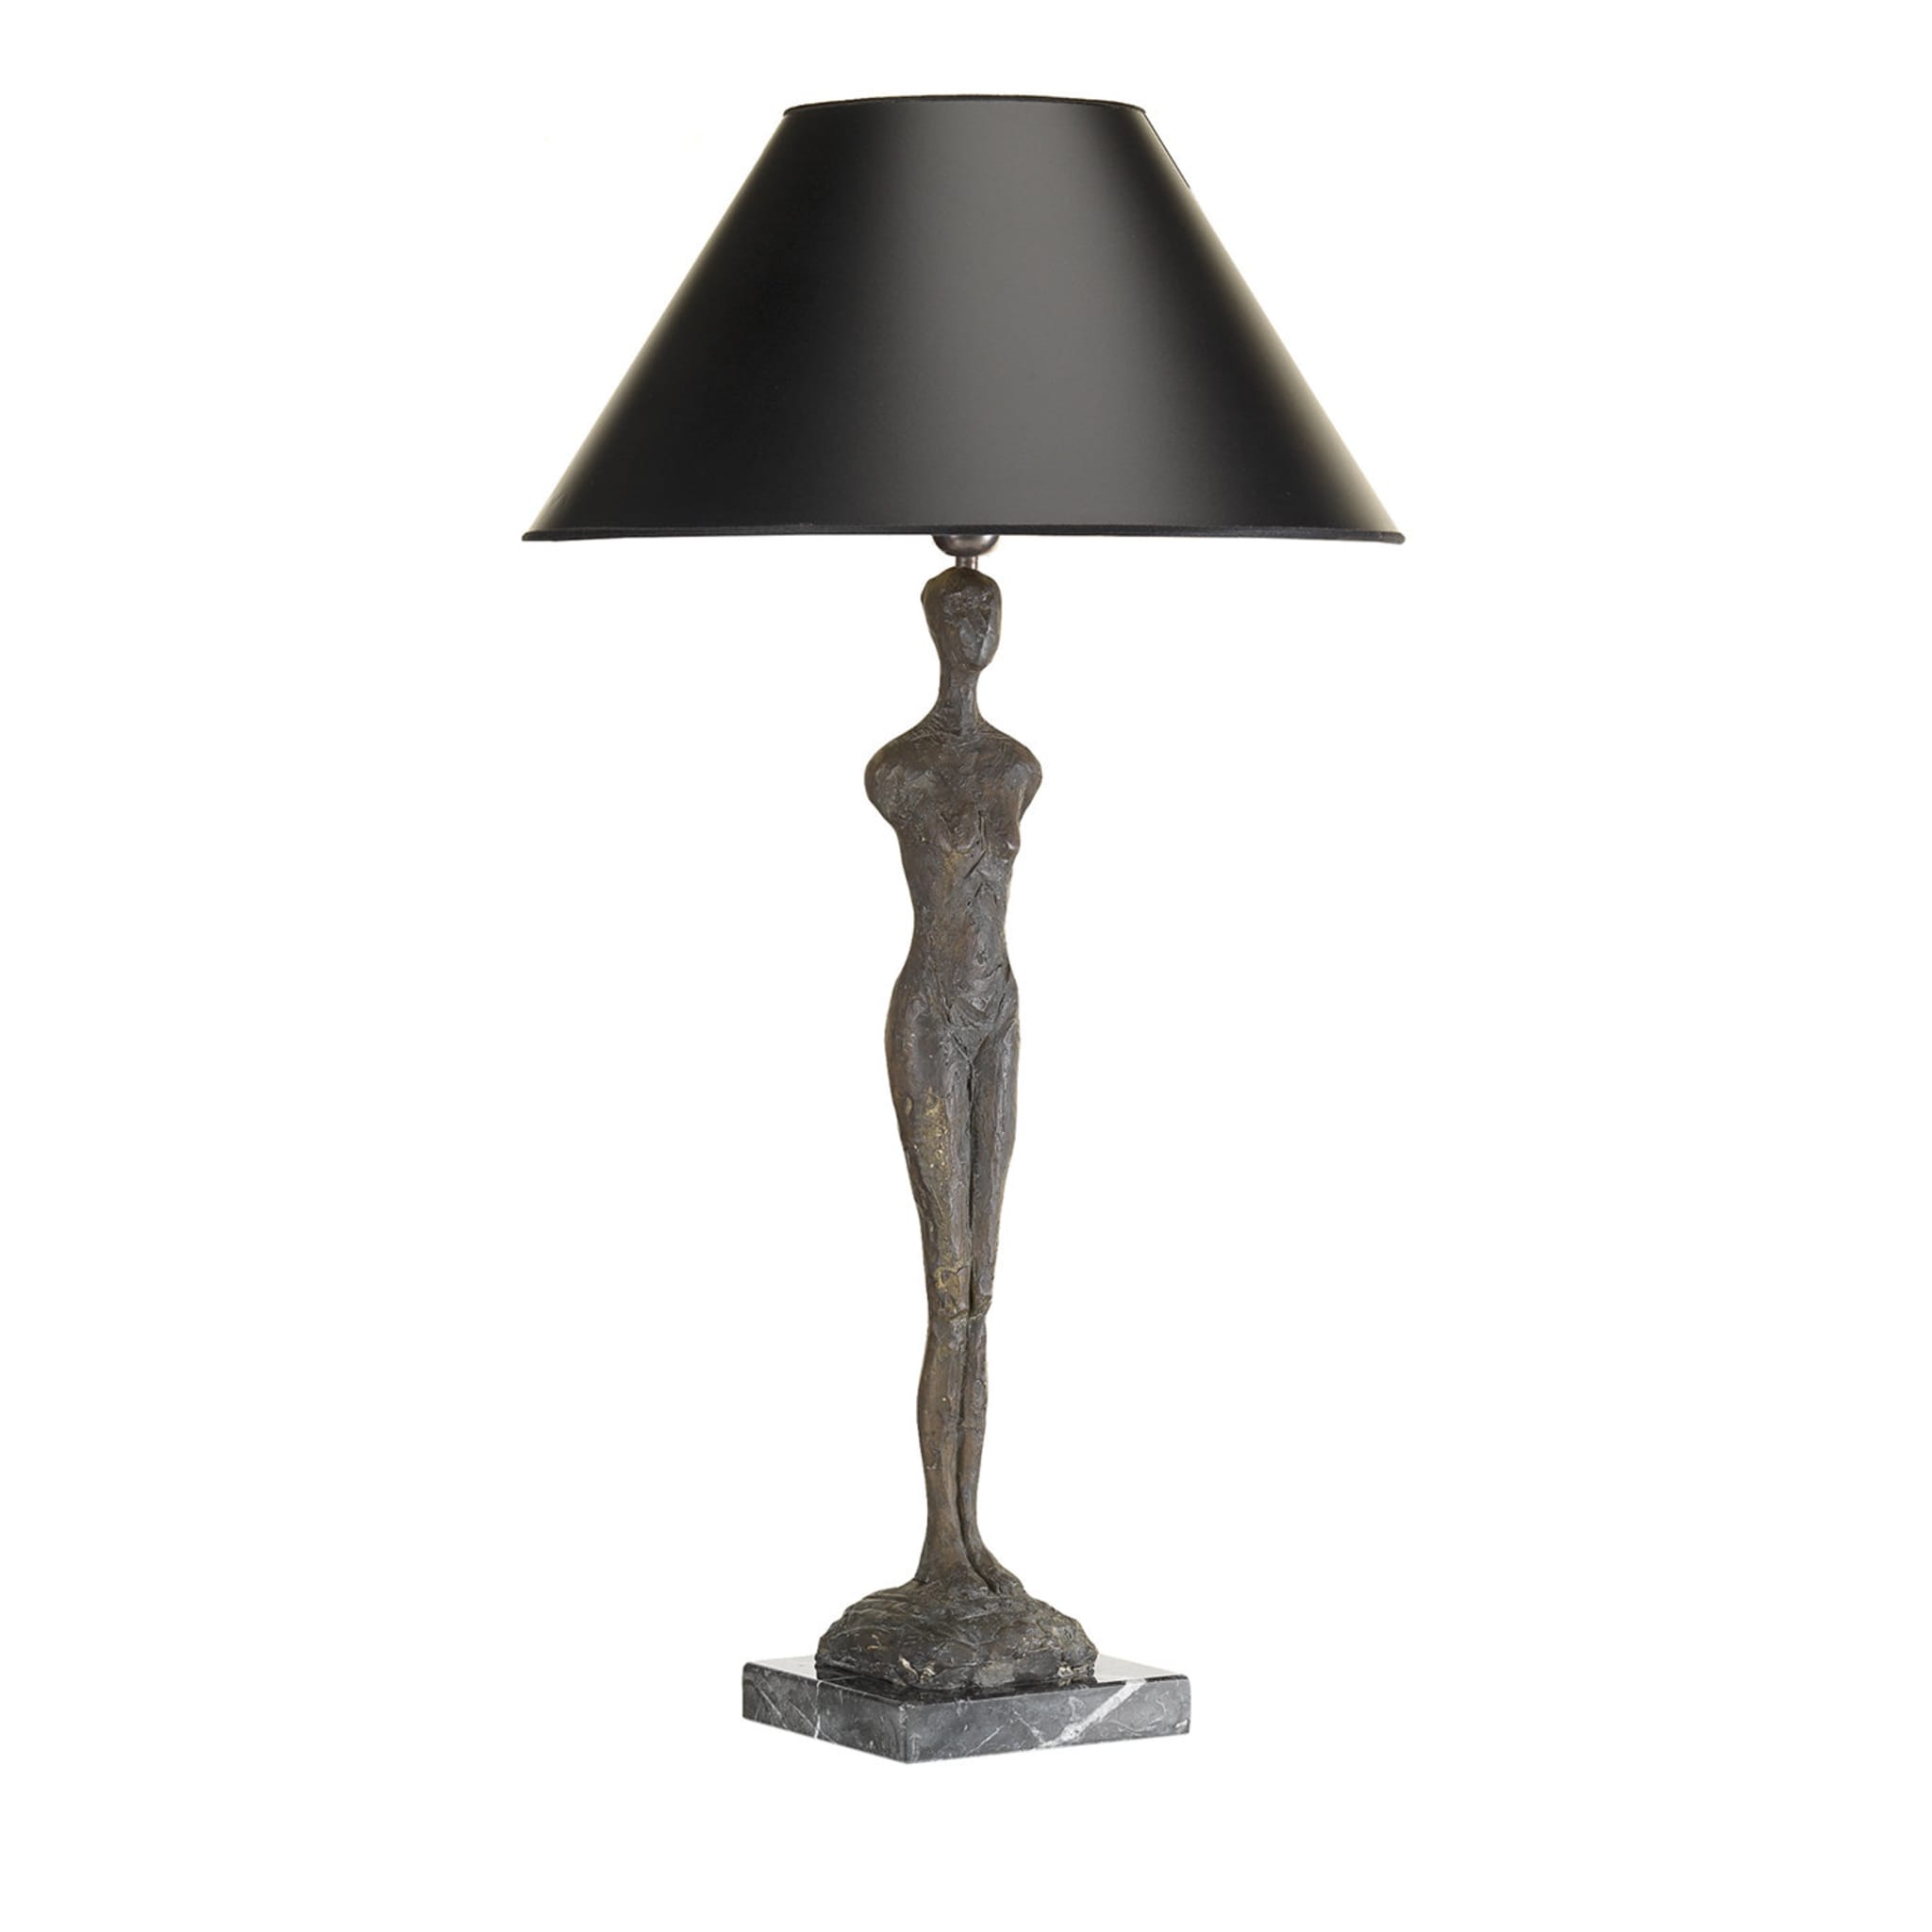 Her Table Lamp - Main view